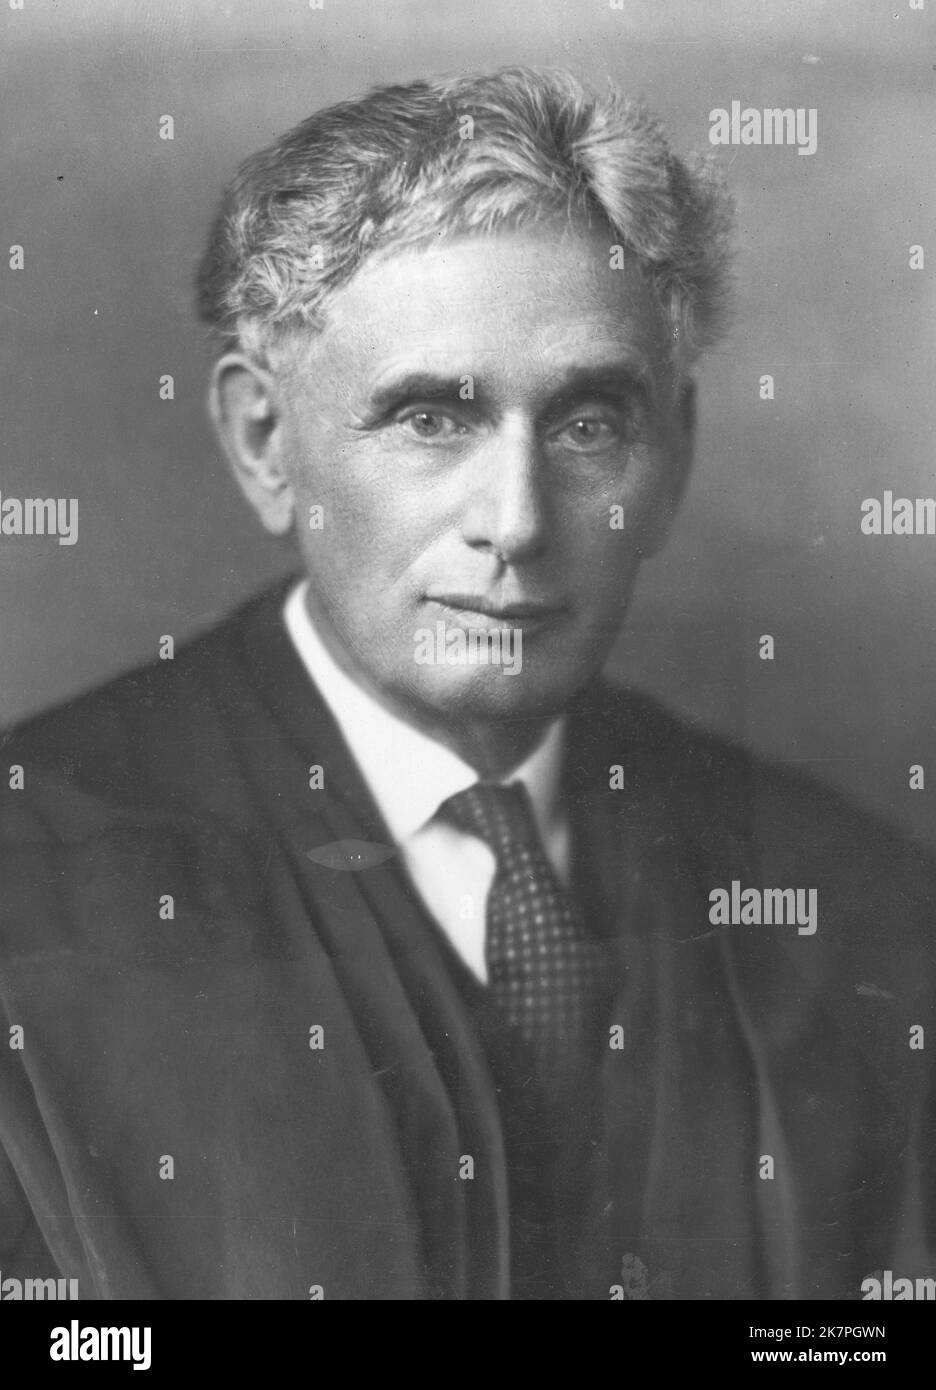 Louis Dembitz Brandeis (1856 – 1941) American lawyer and associate justice on the Supreme Court of the United States from 1916 to 1939. Stock Photo